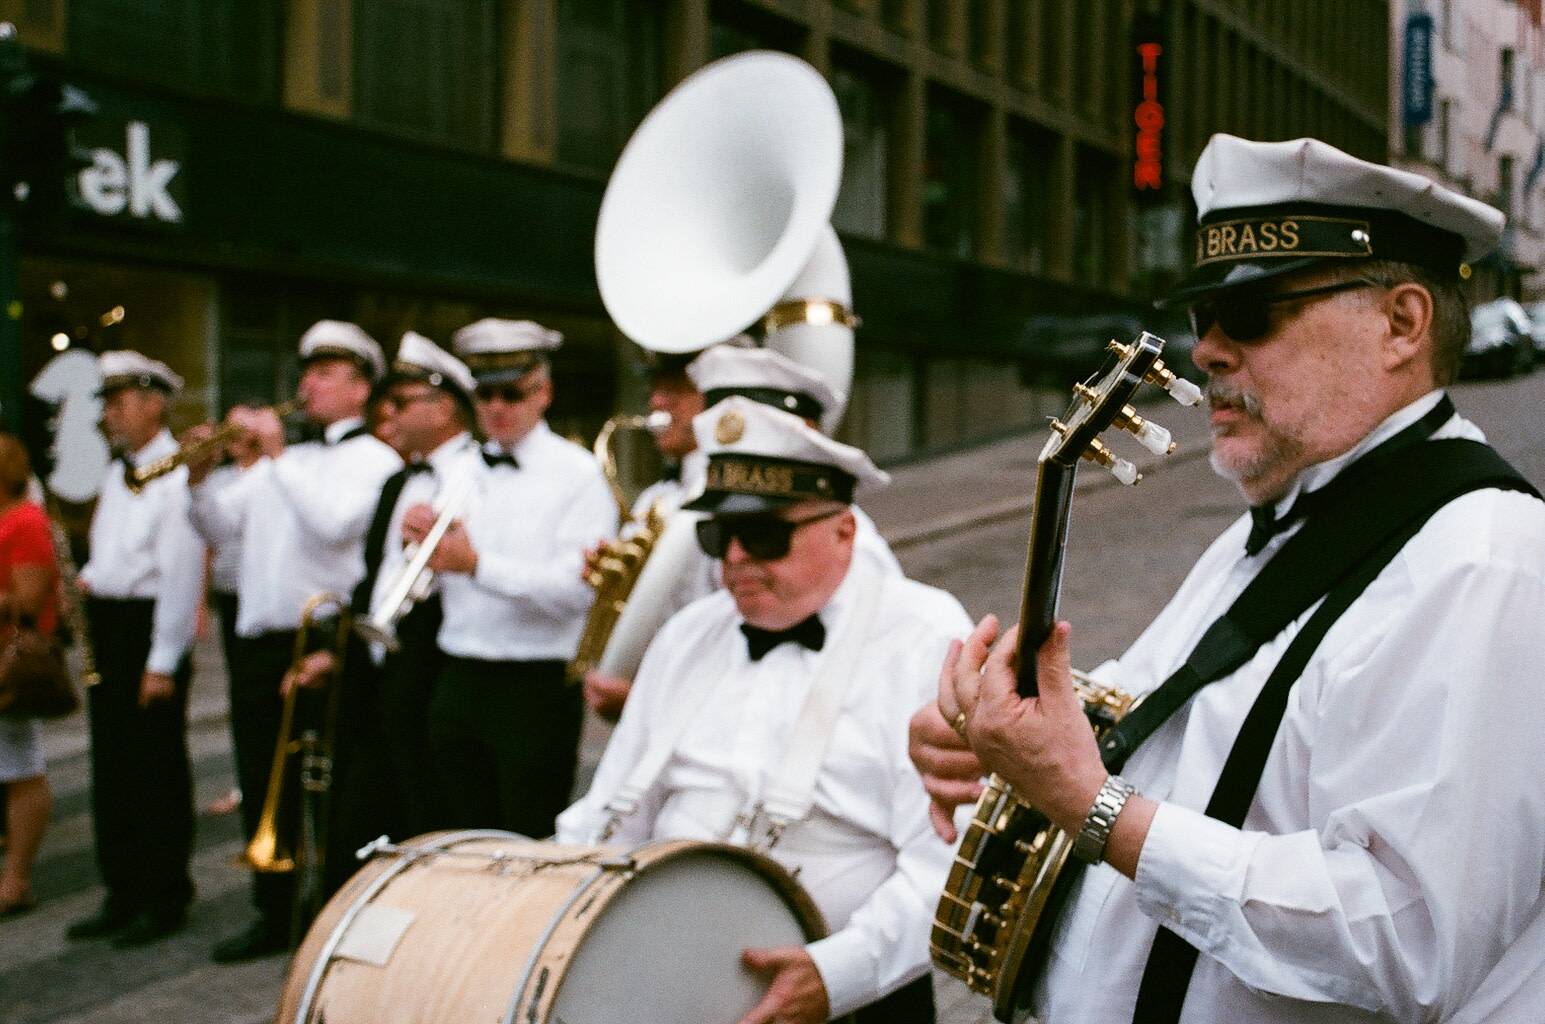 band members dressed in white and black uniforms performing music on the street